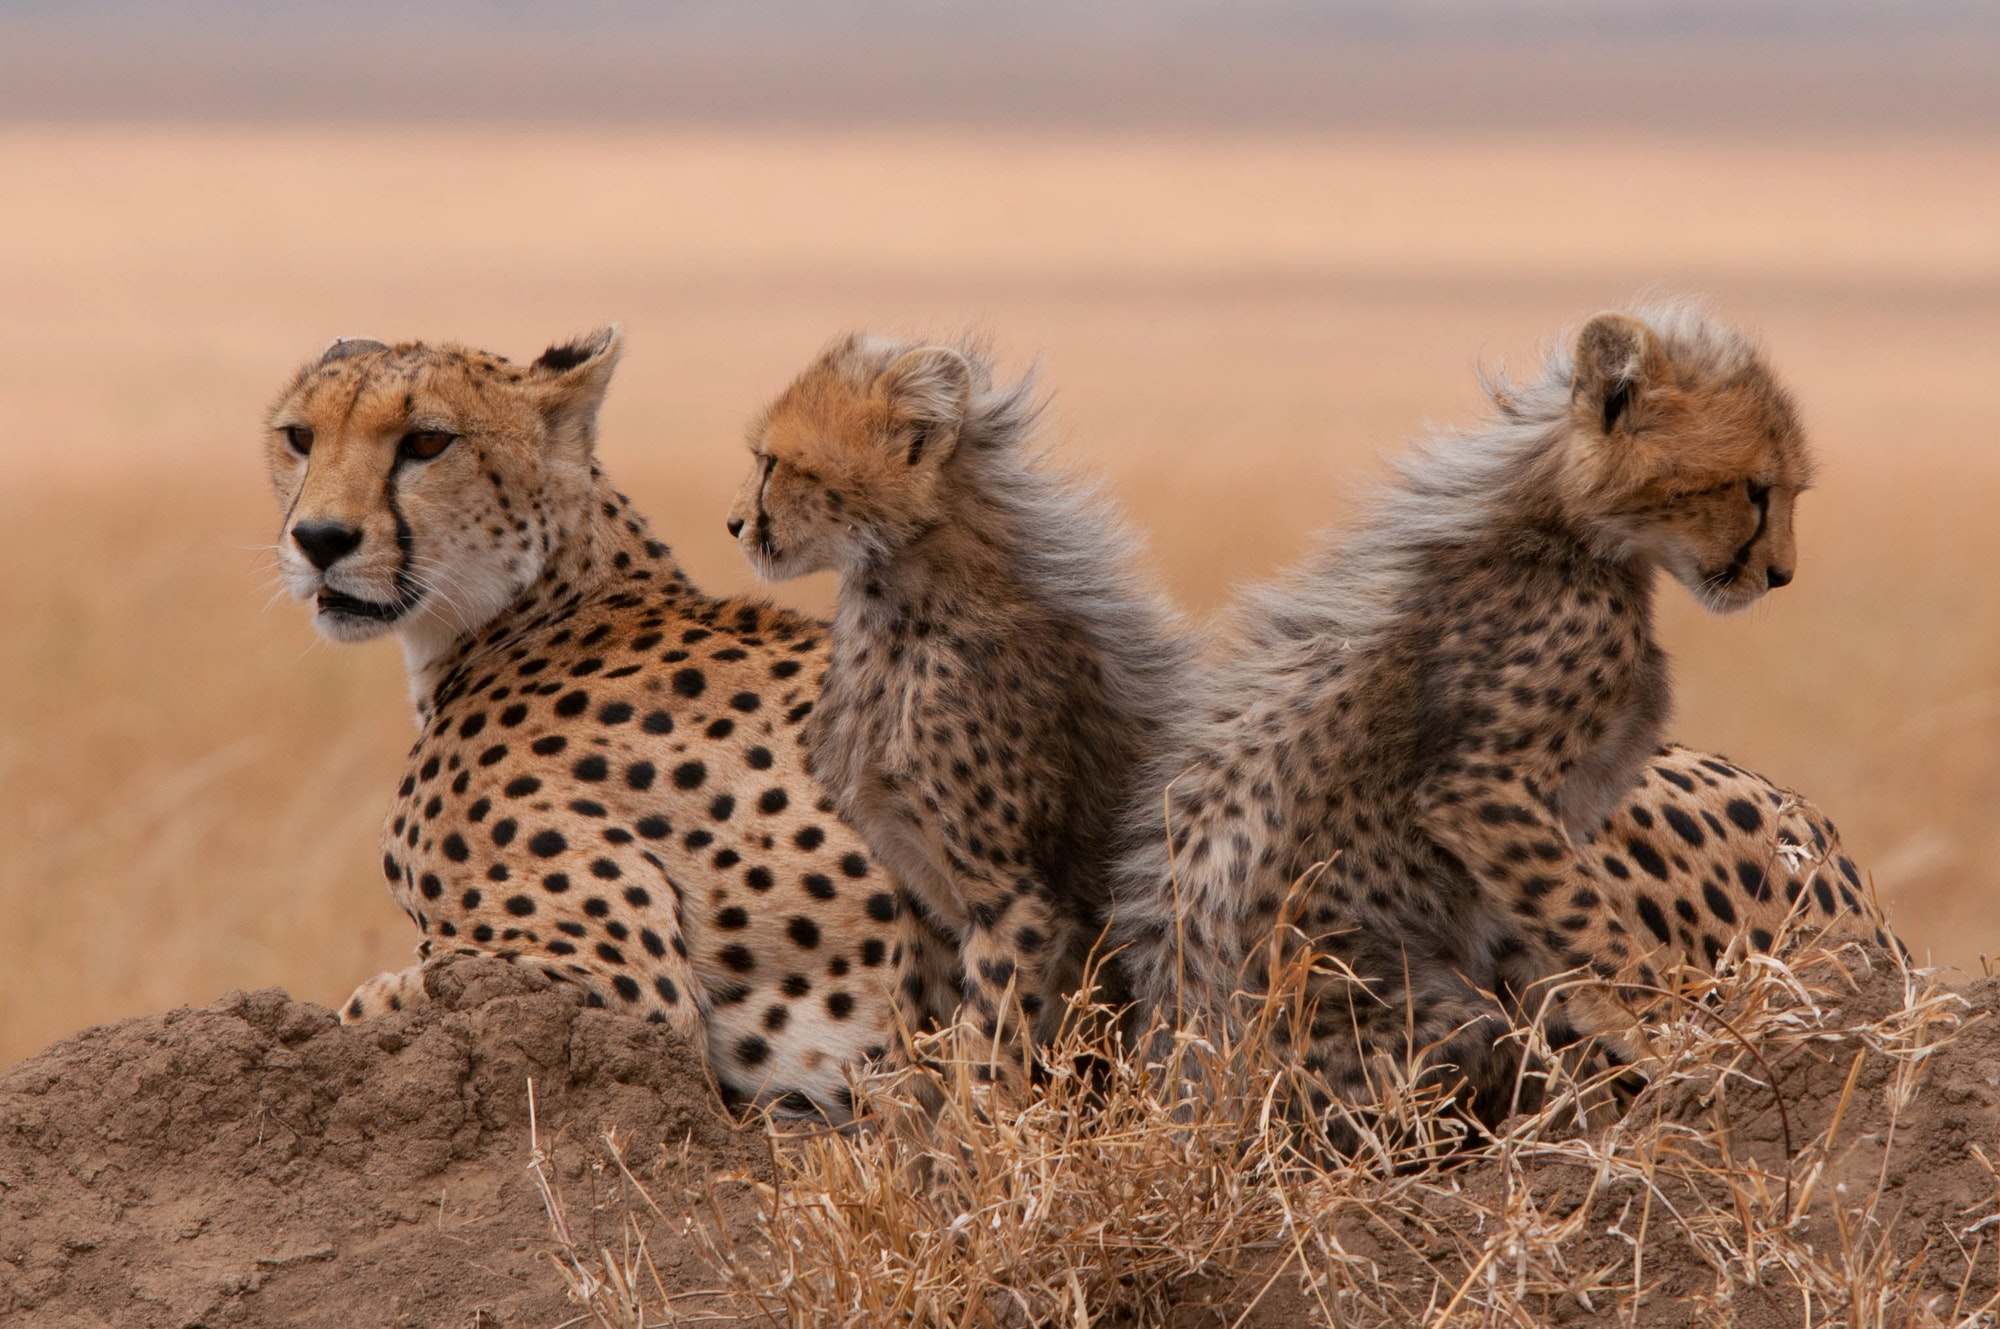 CHEETAH IN THE WILD, AFRICA